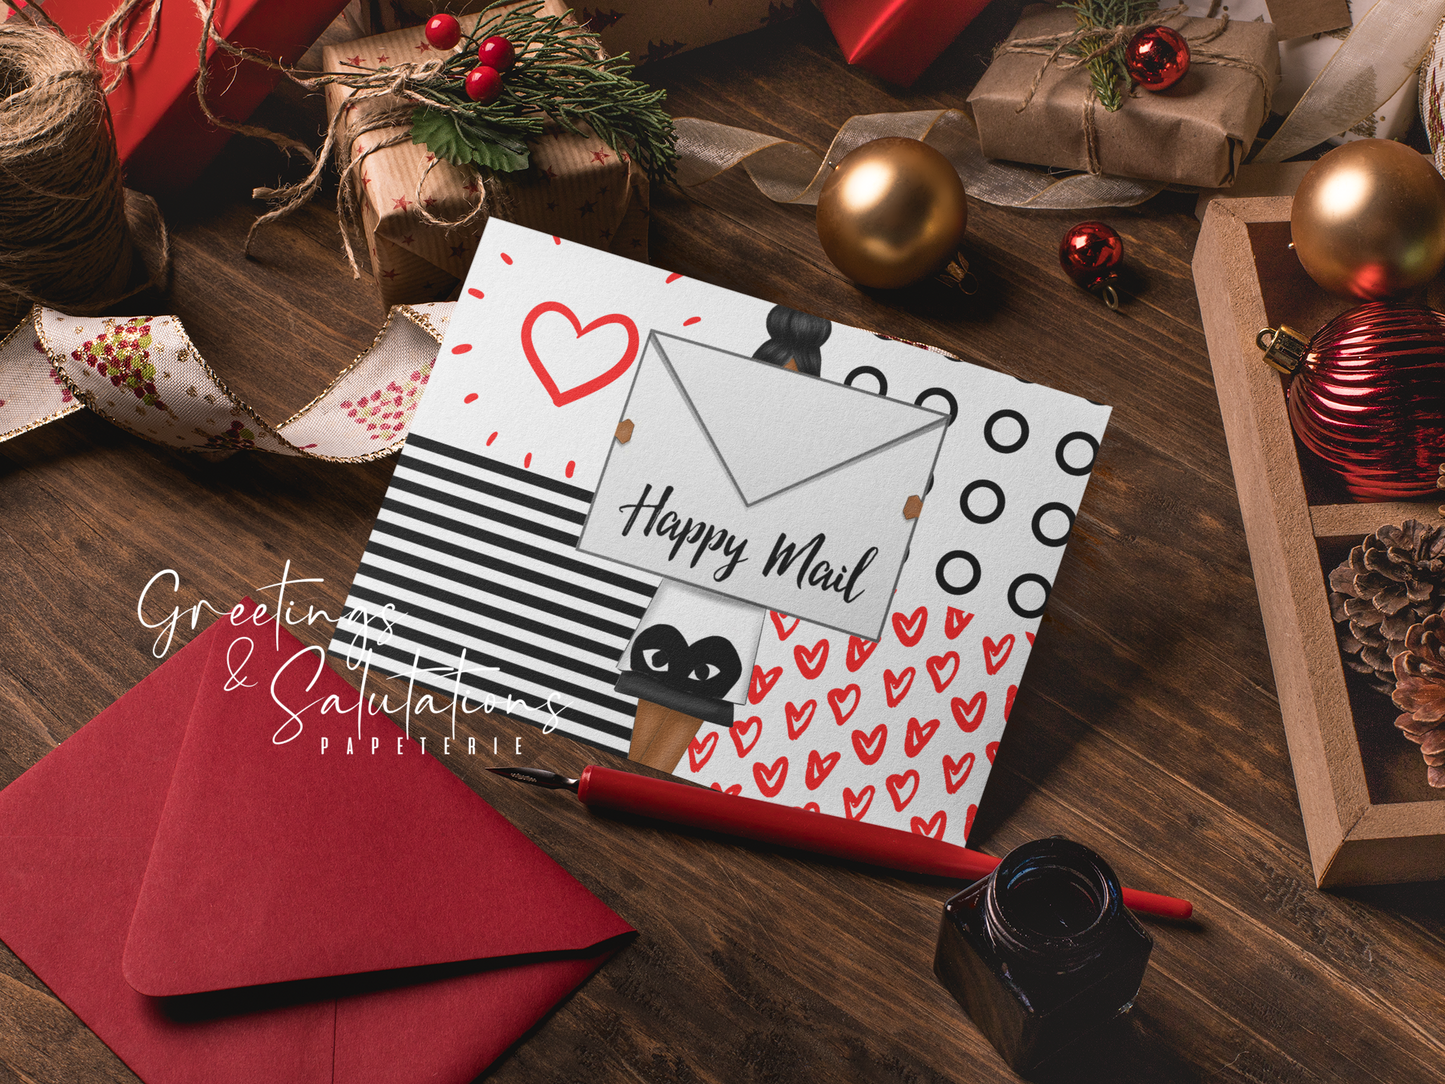 Happy Mail Notecard Set of 8